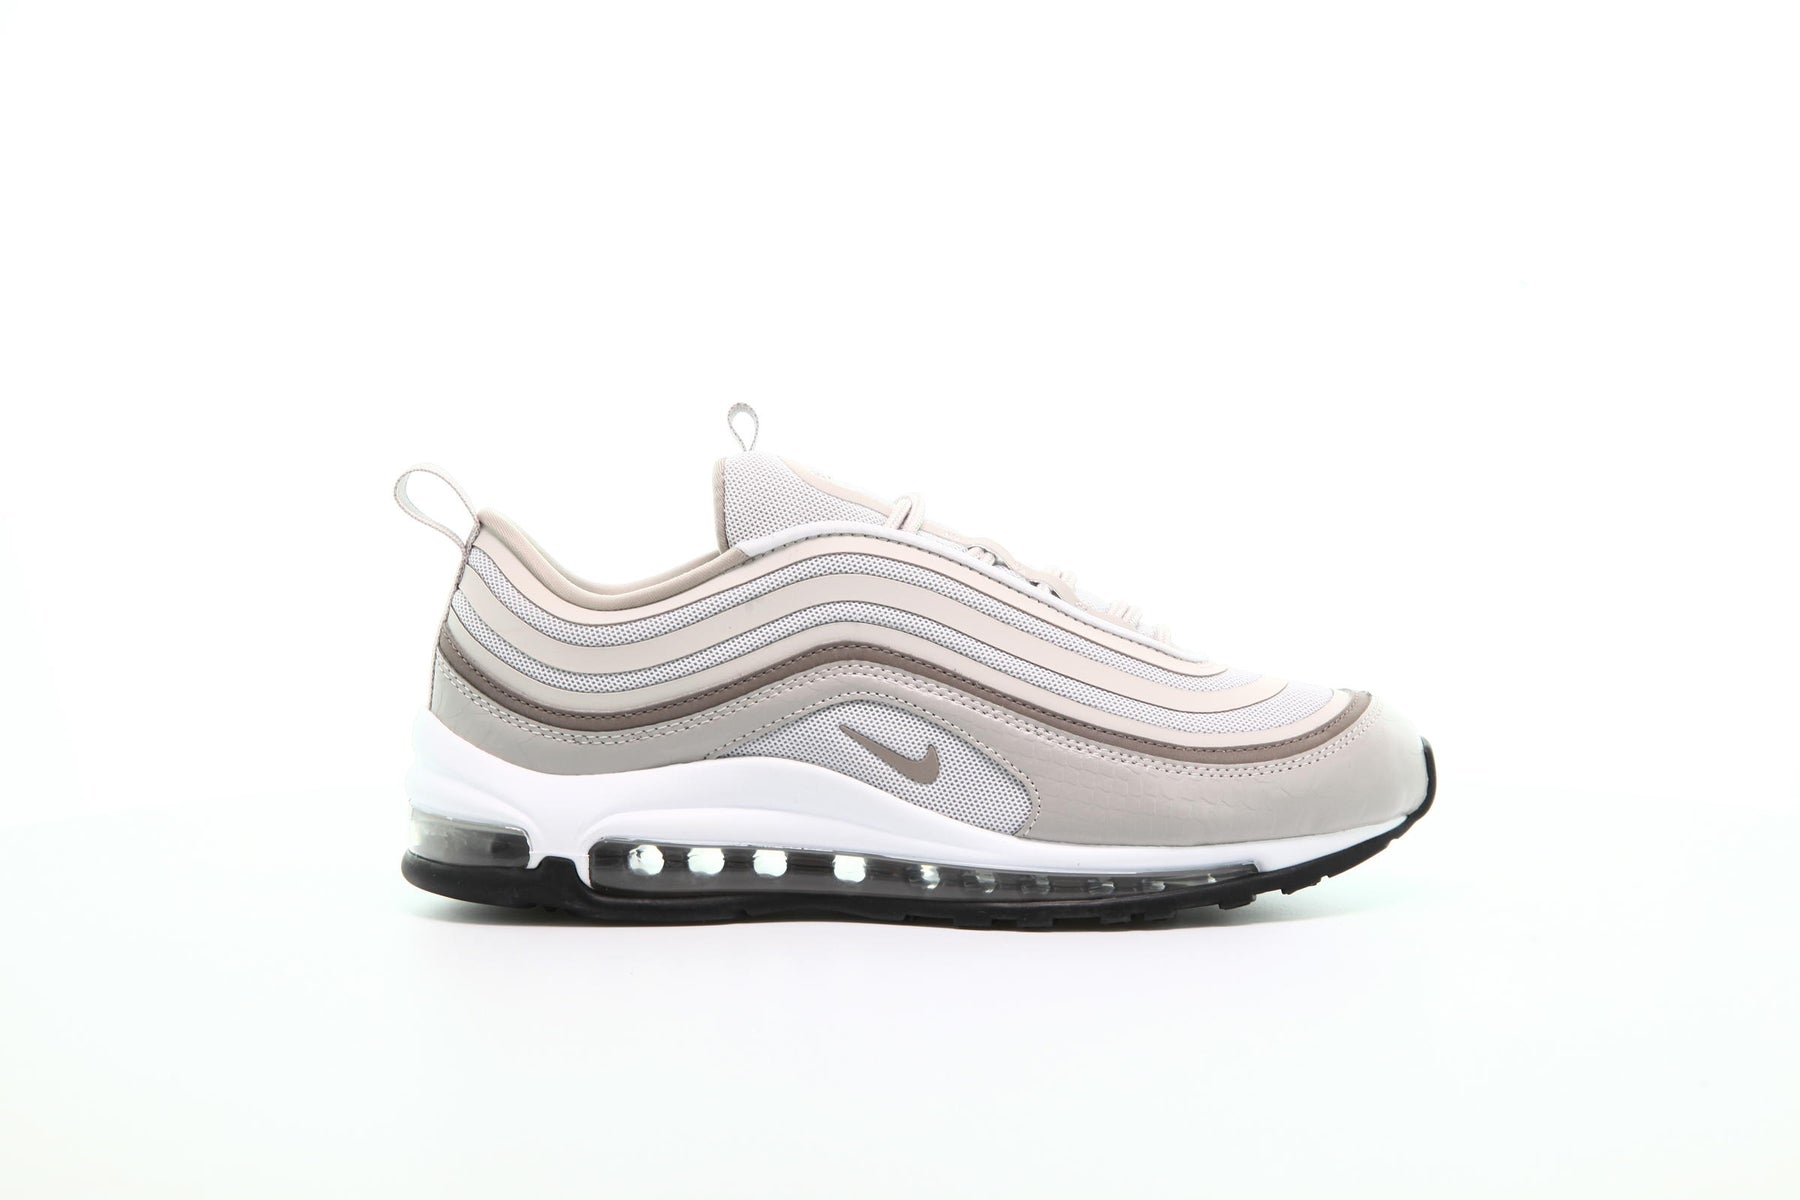 Nike WMNS Air Max 97 Ultra'17 SE "Moon Particle"